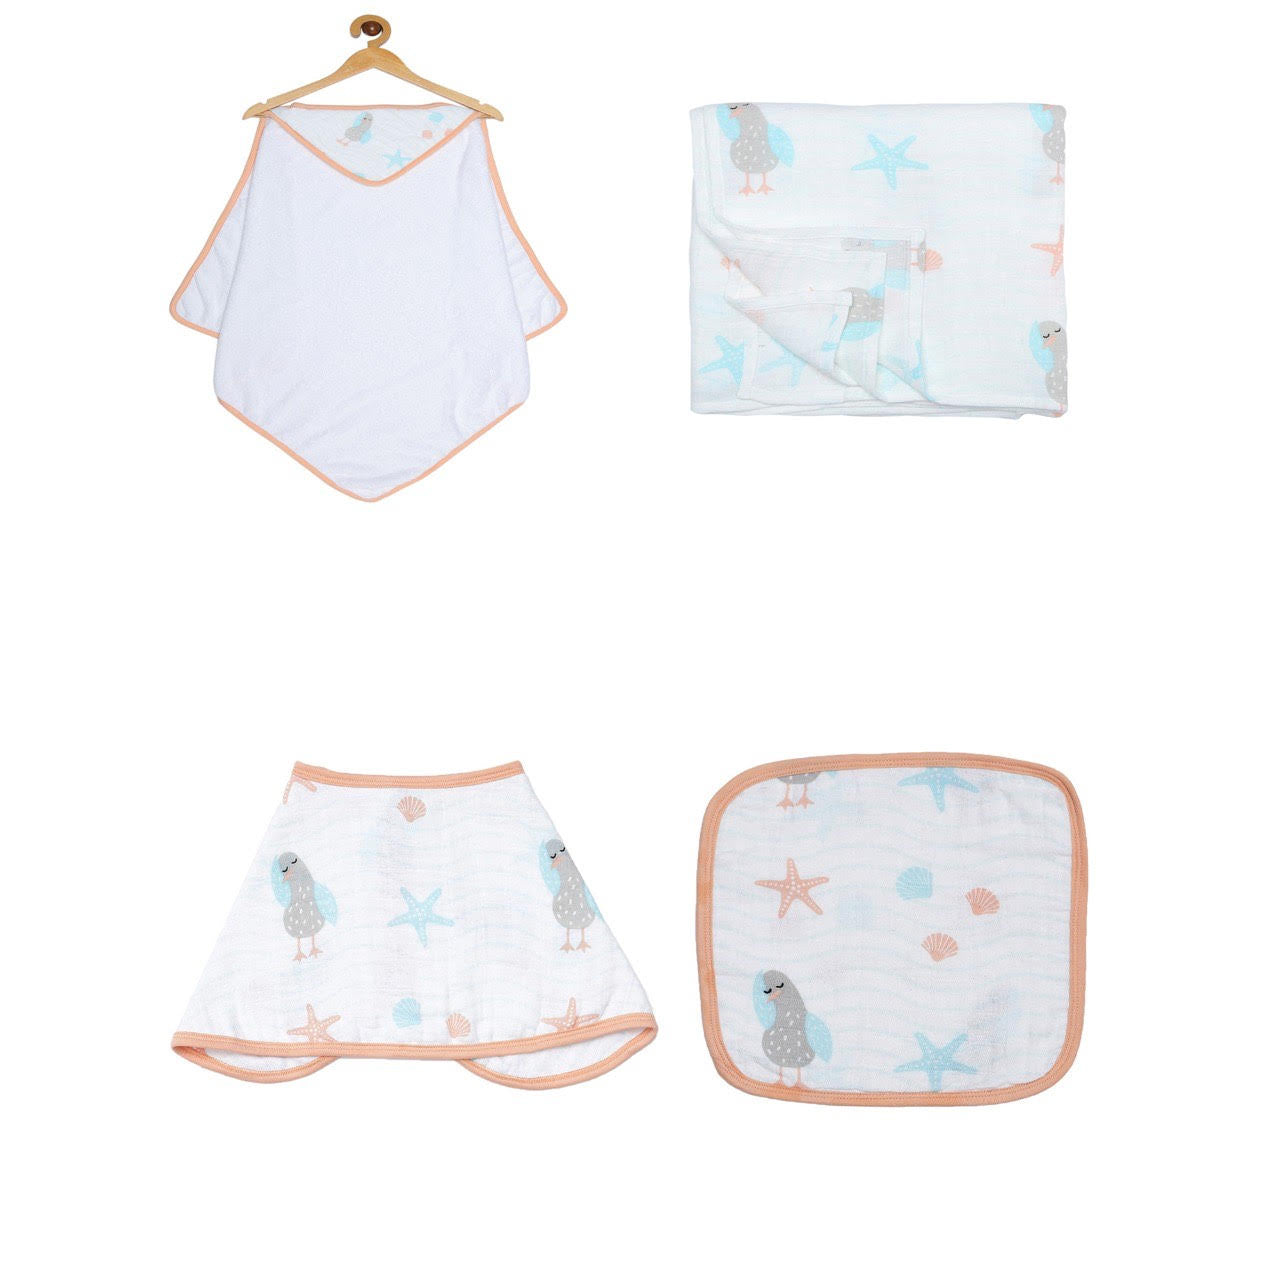 Ooka Baby Value Starter Pack- Available in 3 Prints